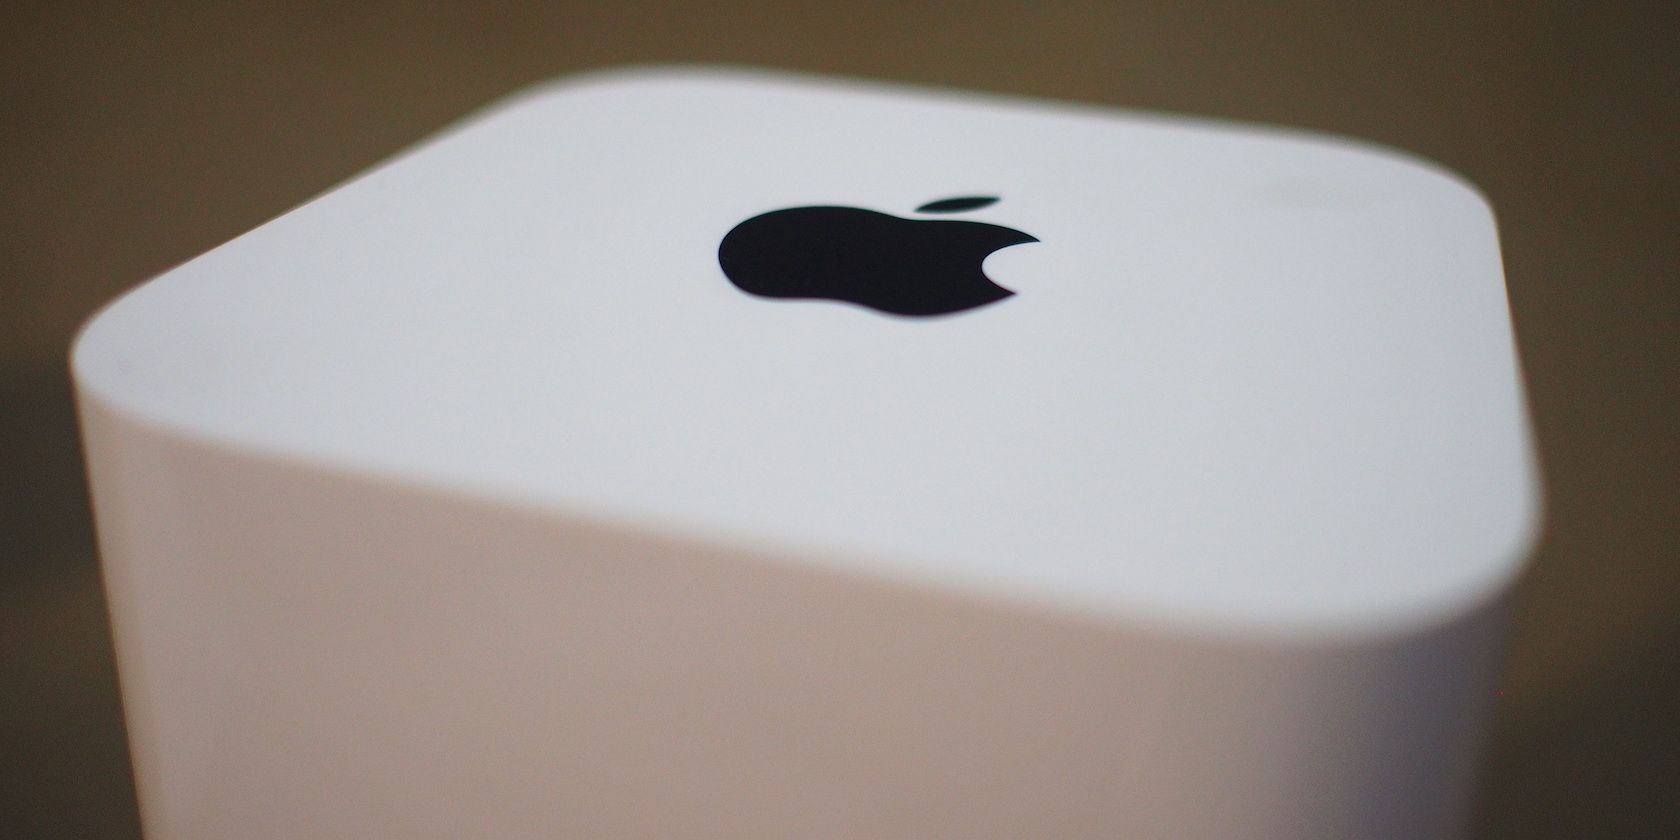 Apple's AirPort Extreme: What Happened Apple's Router?